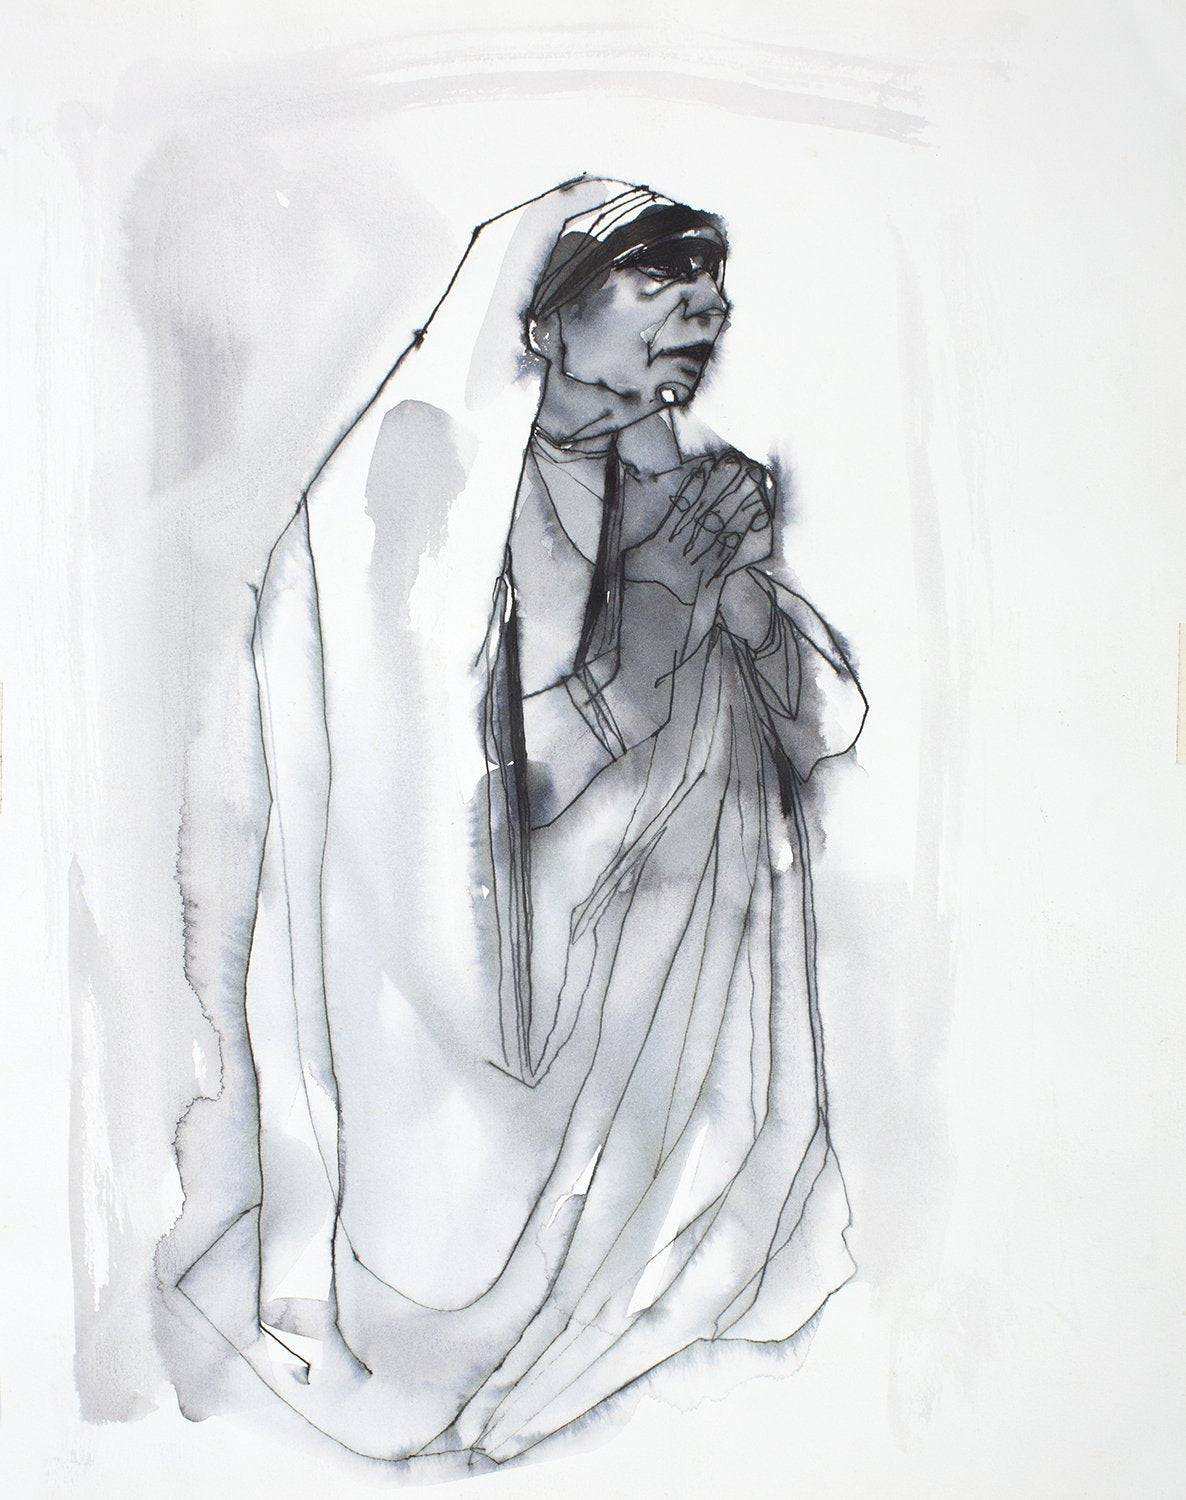 Mother Teresa II|S. Mark Rathinaraj- Pen and Ink on Paper, , 15.5 x 12 inches